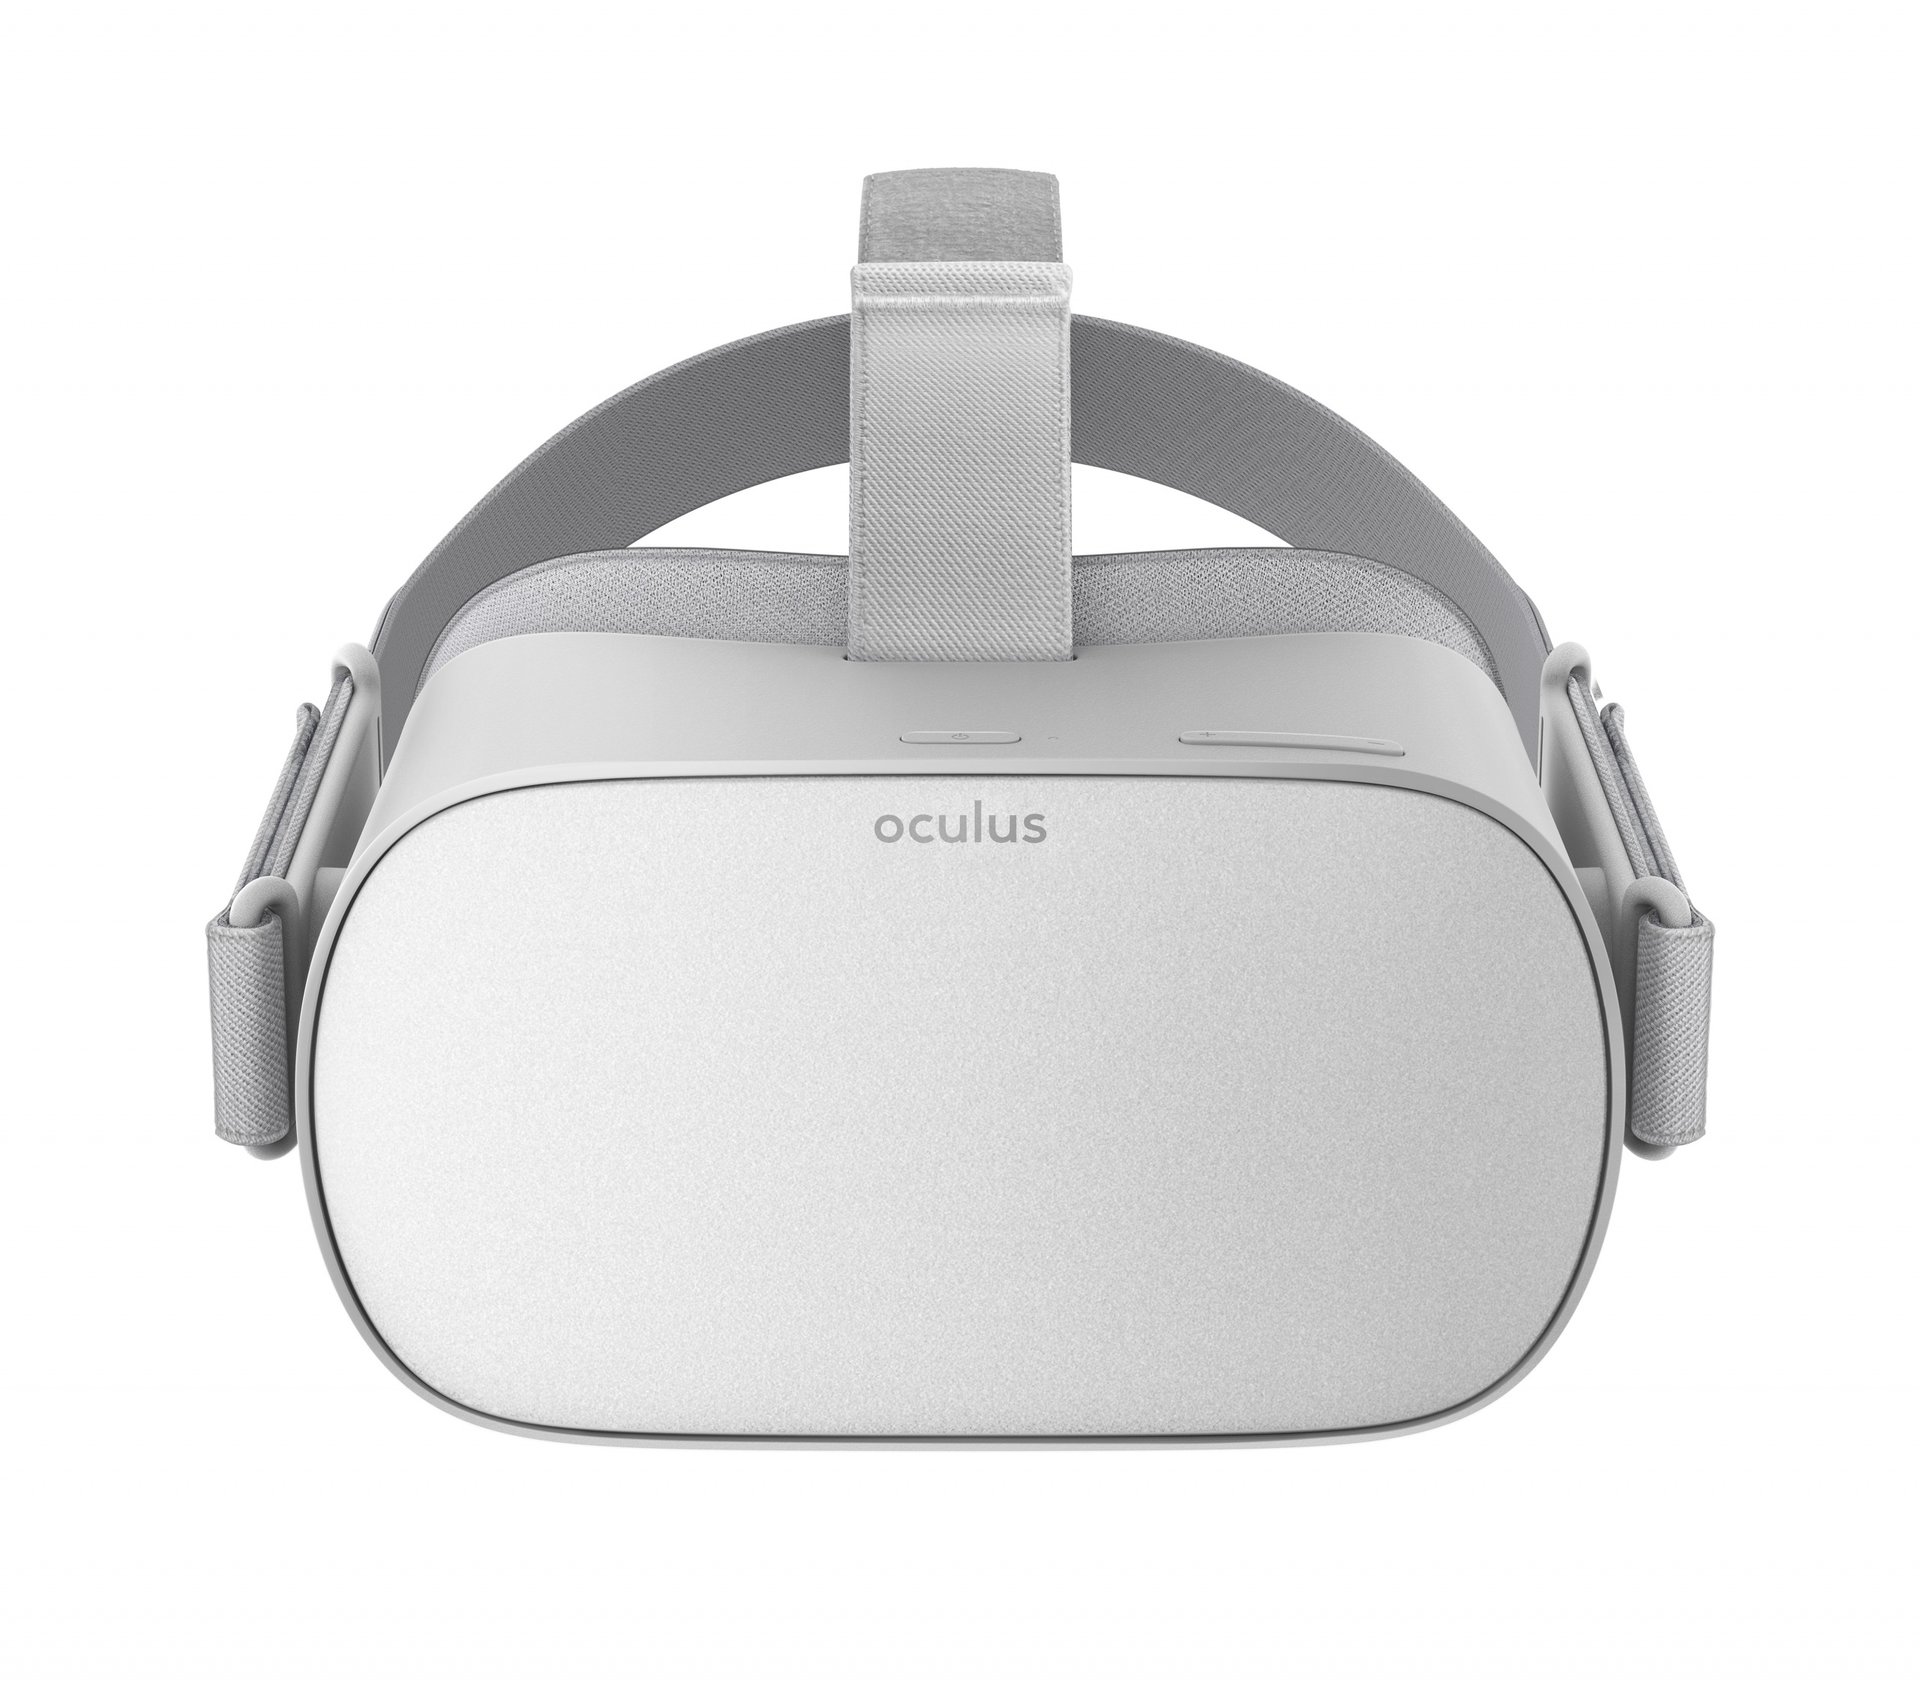 An Oculus GO VR headset on a white background.